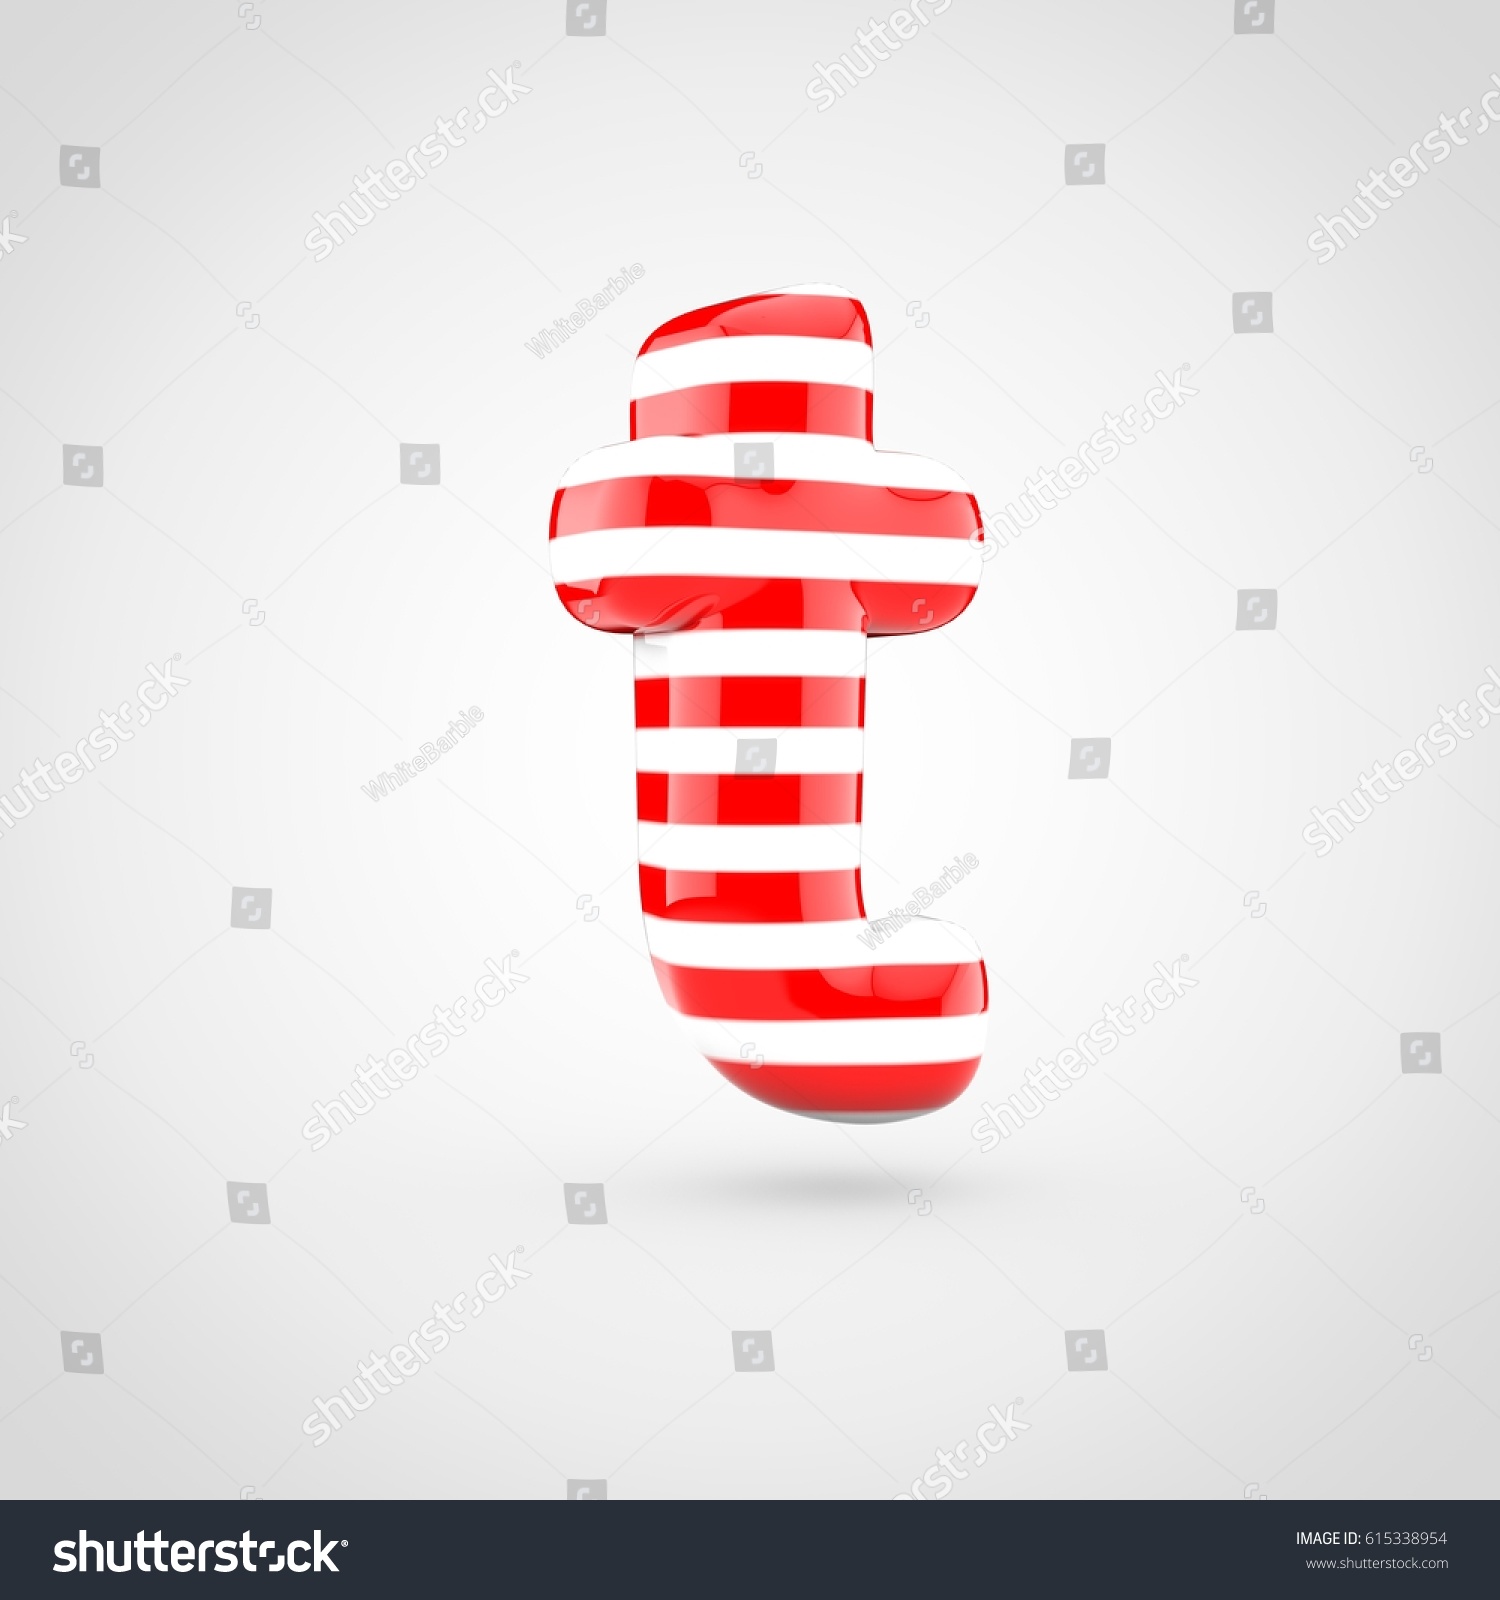 Royalty Free Stock Illustration Of Striped Red White Glossy Letter T